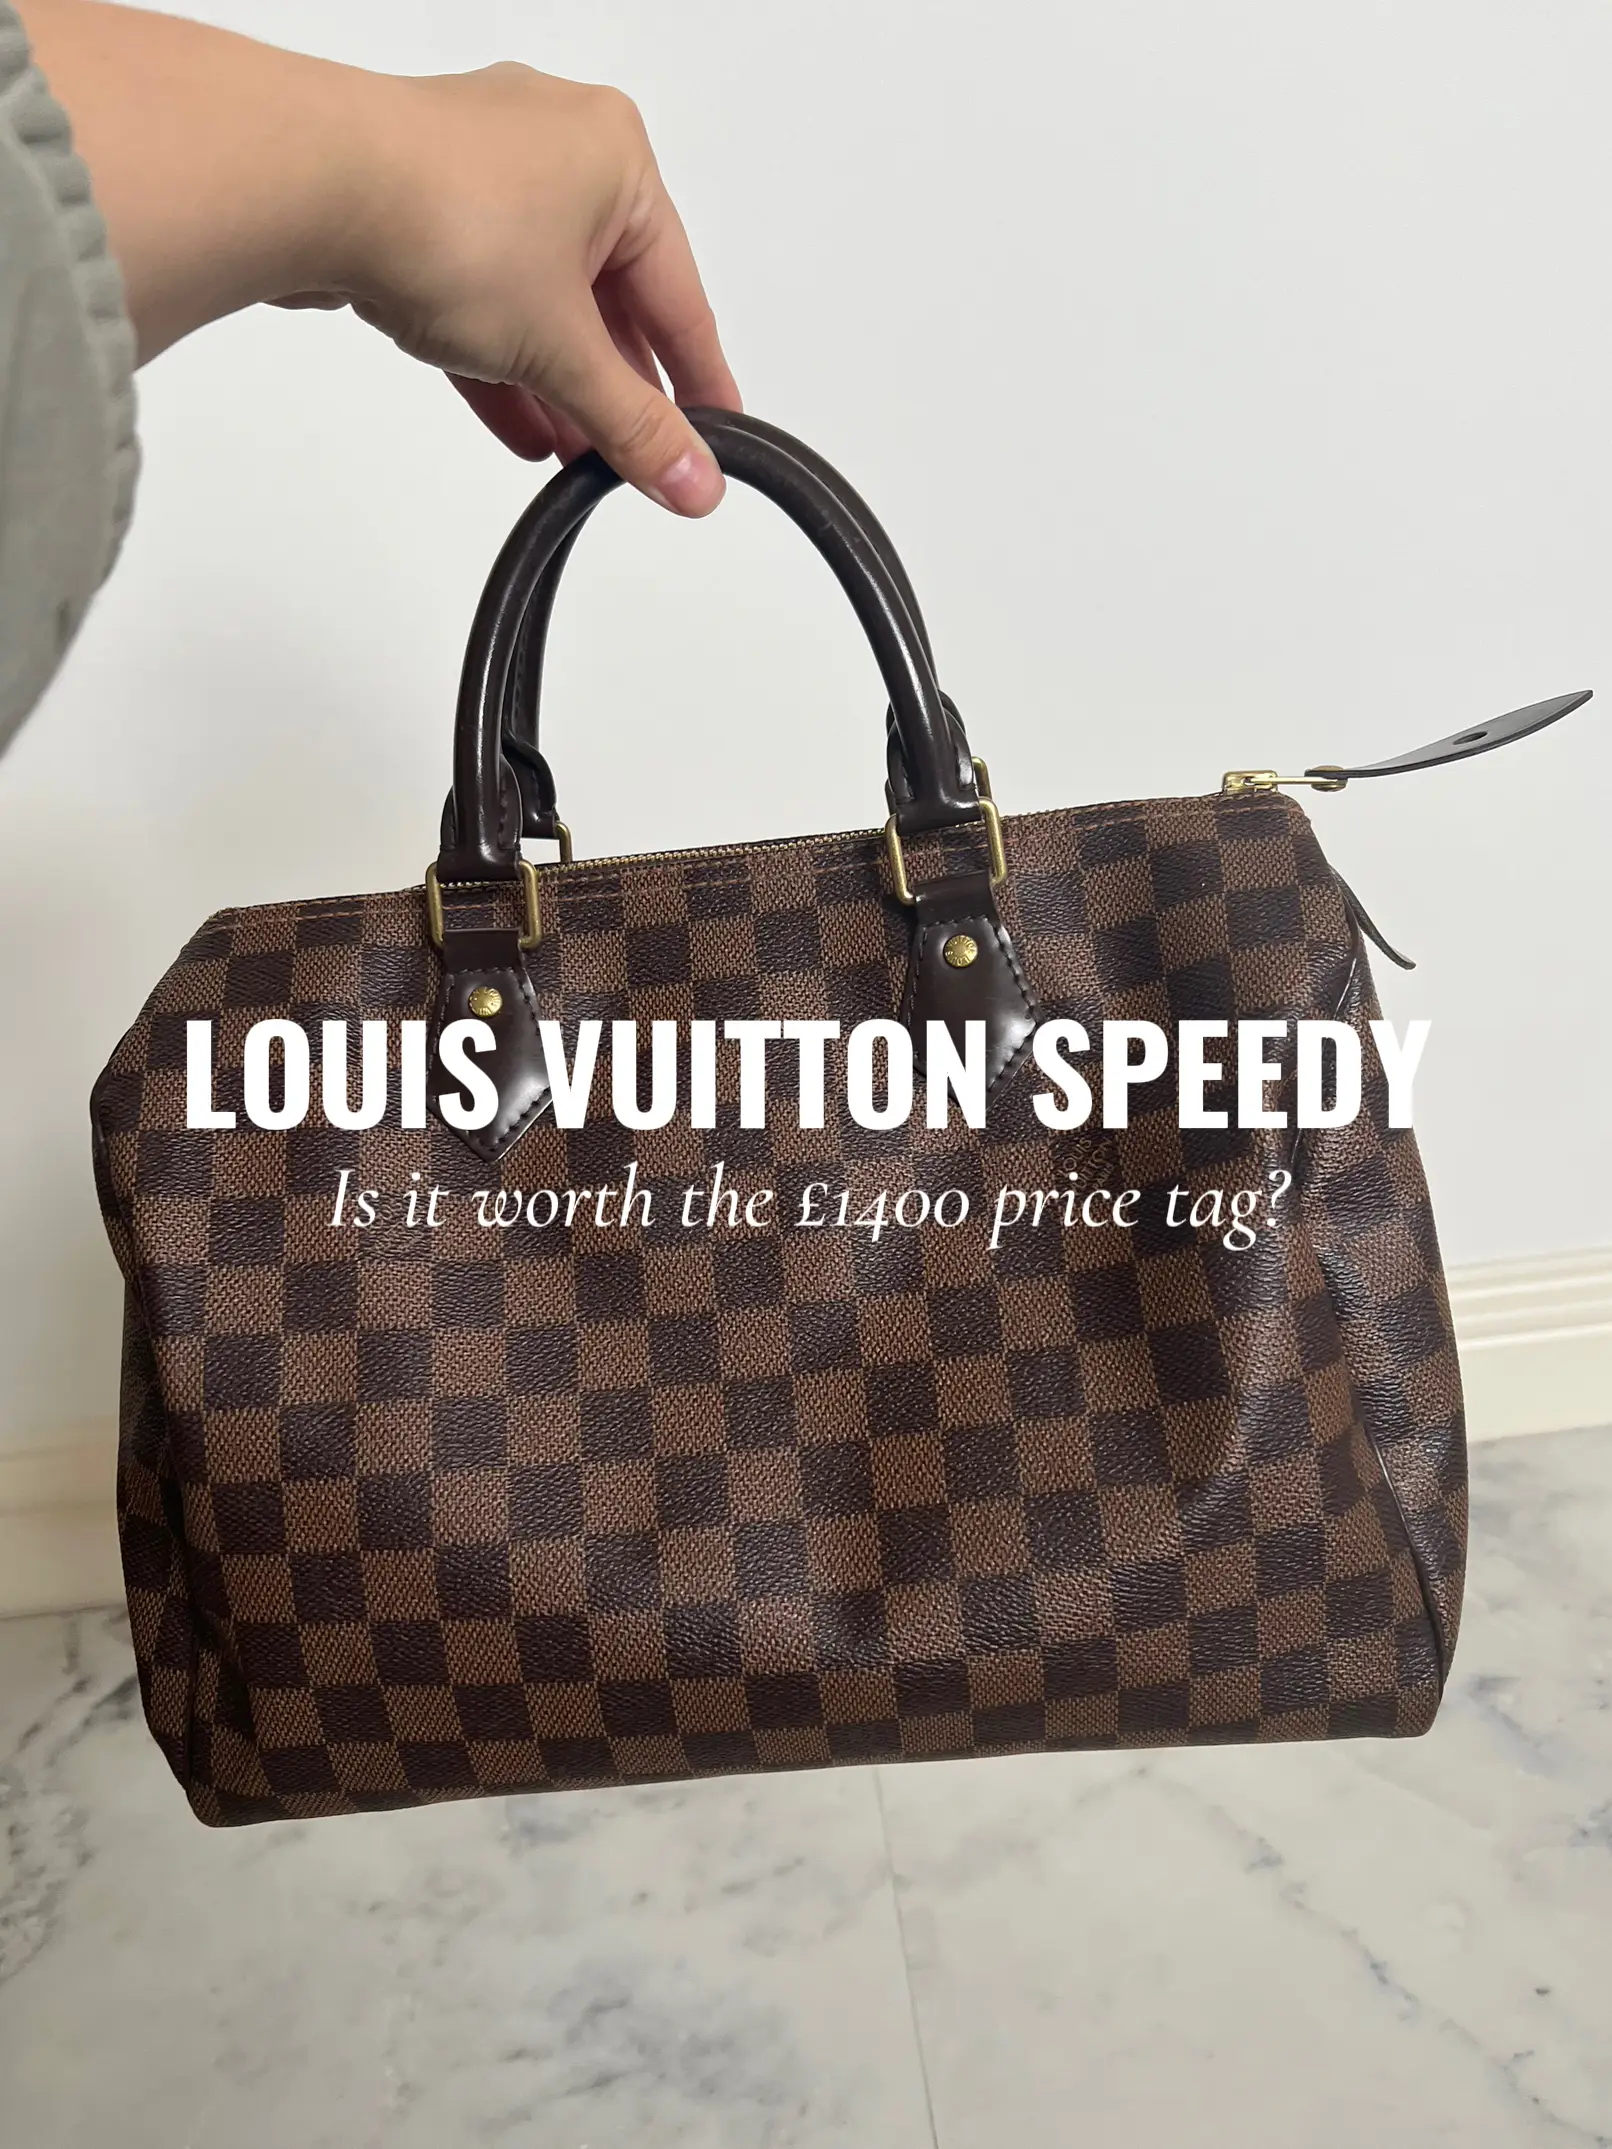 BAGS NOT WORTH THE INFLATED PRICE TAG?- Louis Vuitton, Hermes etc